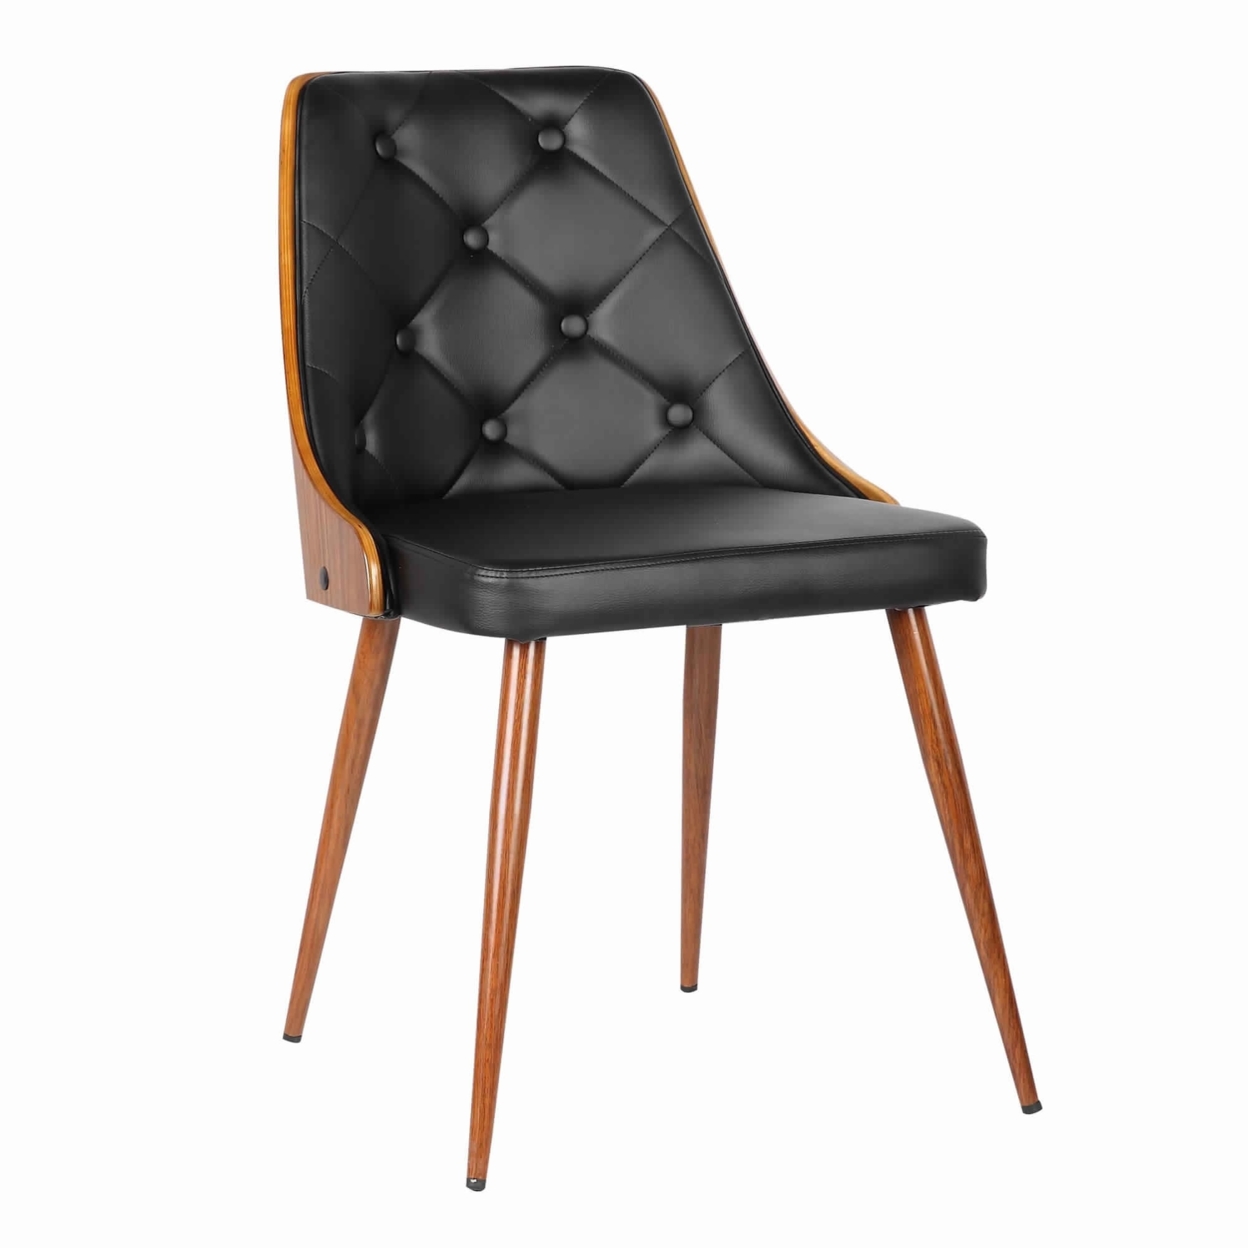 Leatherette Mid Century Tufted Wooden Dining Chair, Black And Brown- Saltoro Sherpi